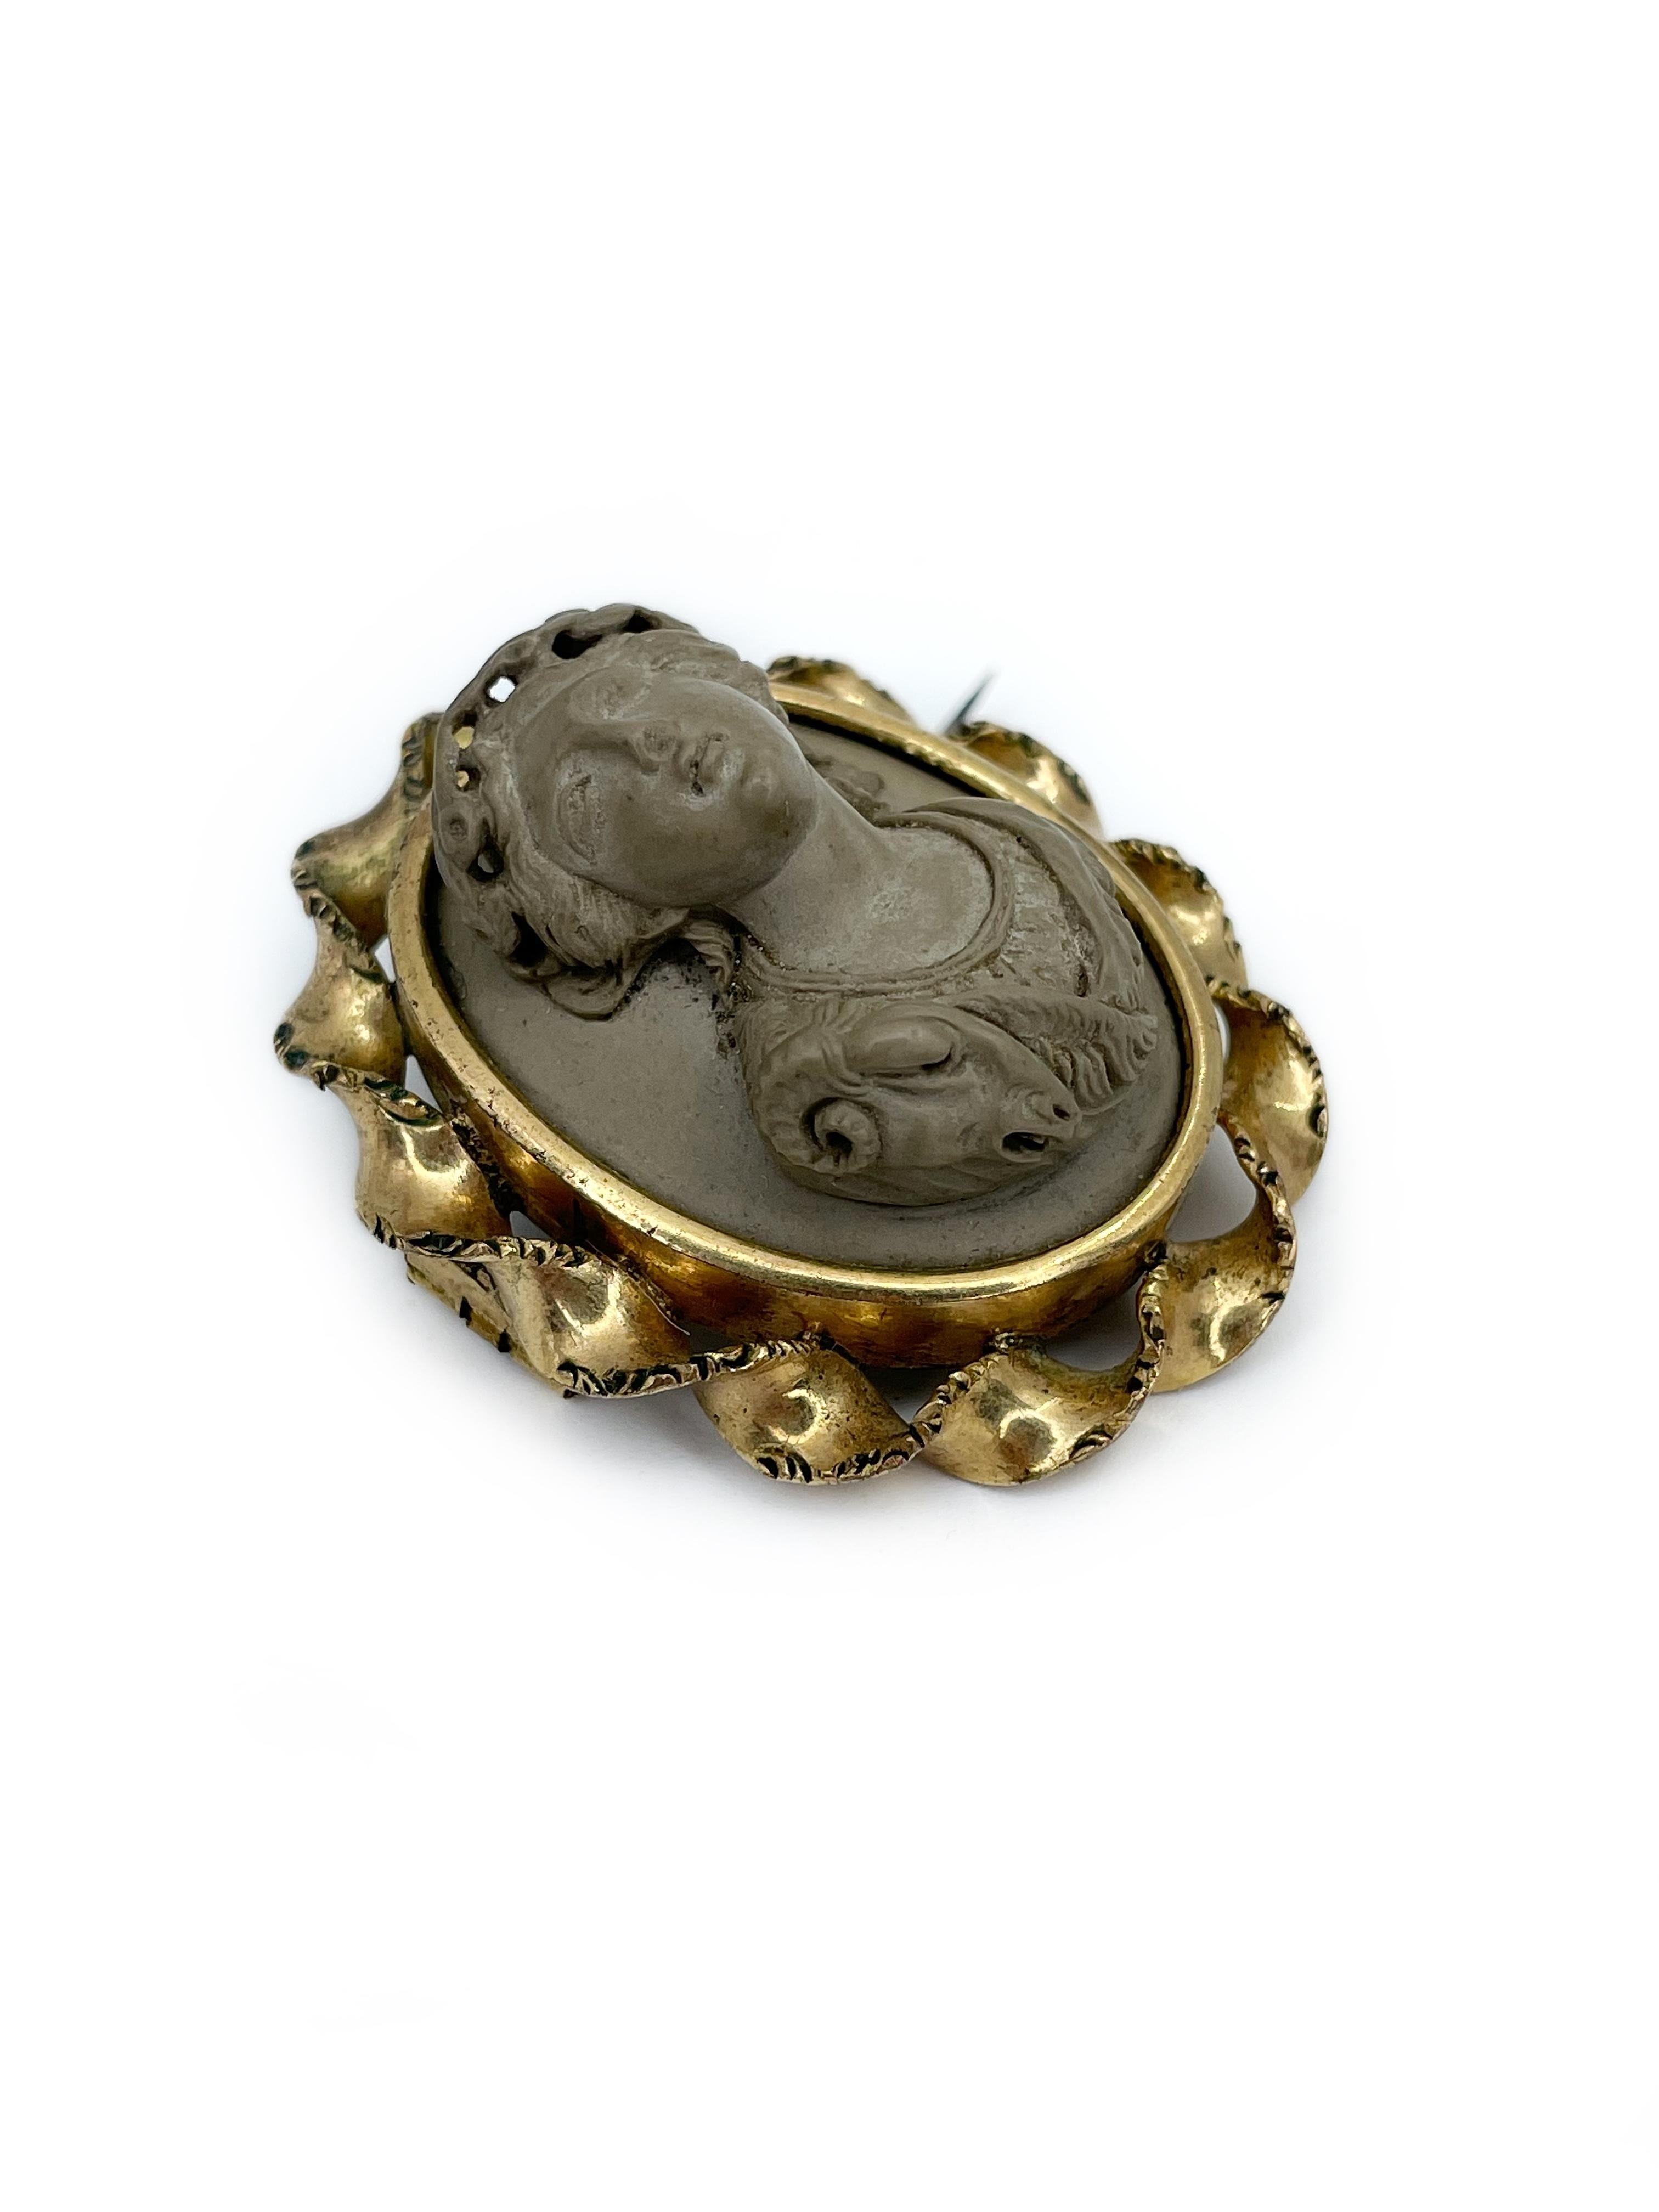 This is a stunning antique Victorian oval gold-filled cameo brooch. Circa 1850. The cameo is carved from lava and depicts a lady facing left. 

This is a real a real treasure not only for unusual material but also because left facing cameo are much